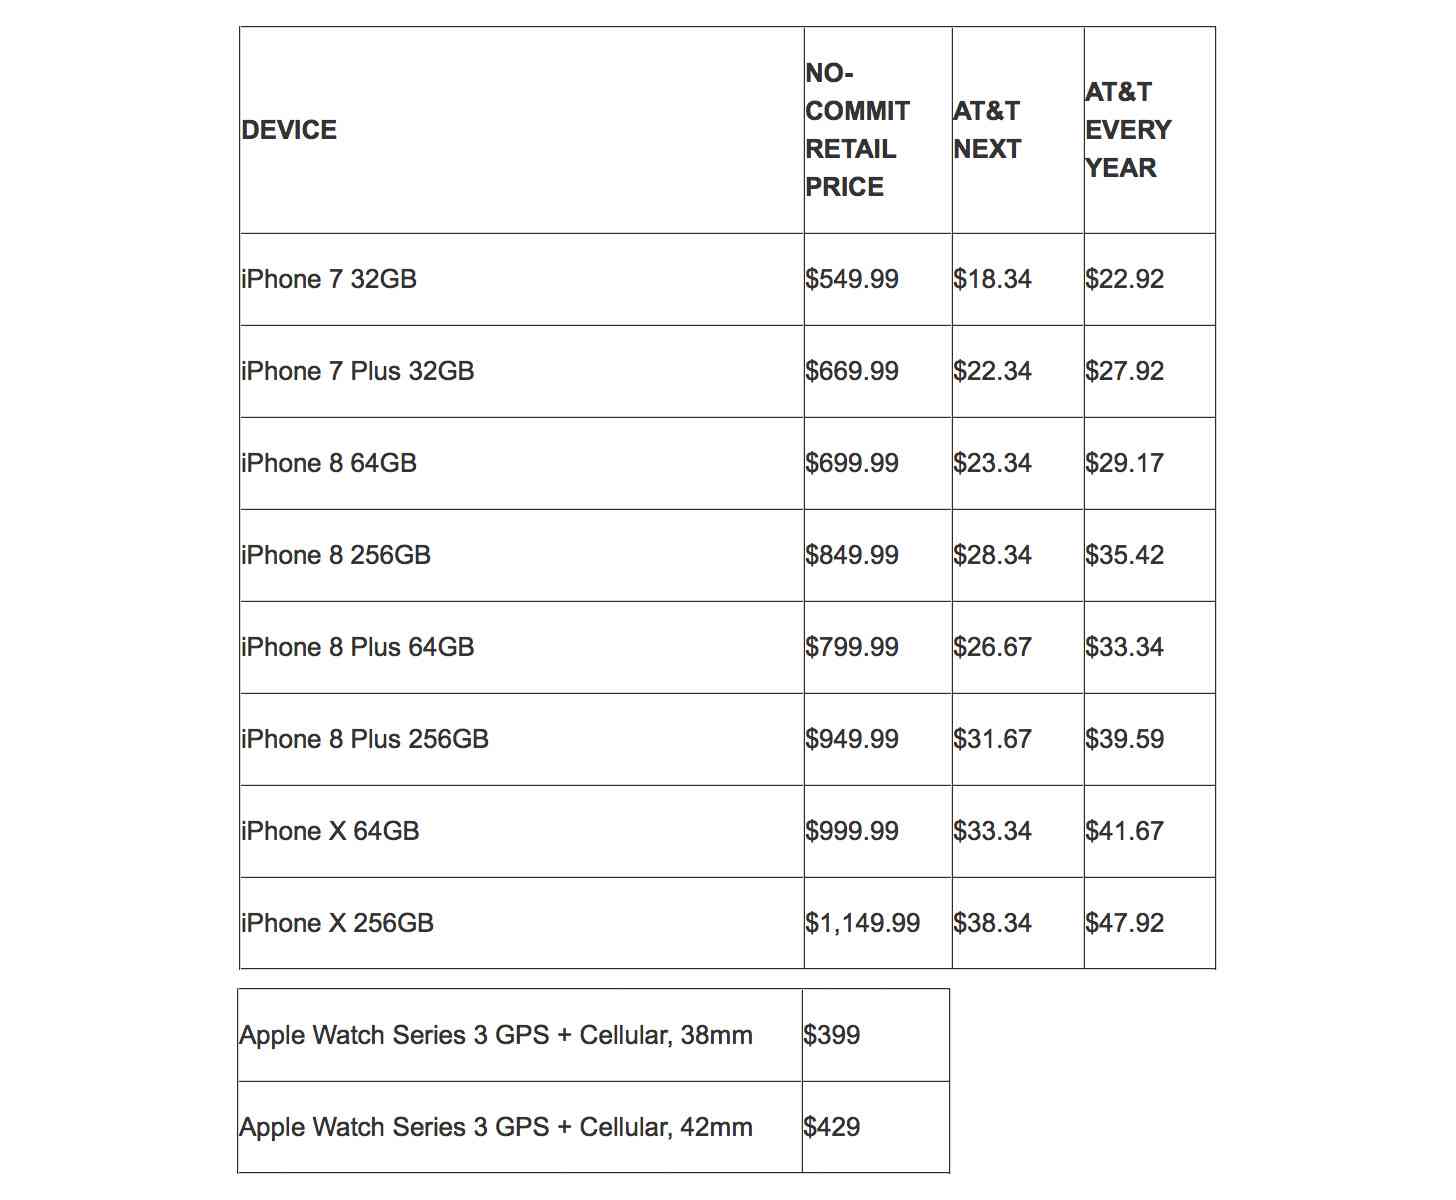 AT&T iPhone 8, iPhone 8 Plus, iPhone X, Apple Watch Series 3 prices